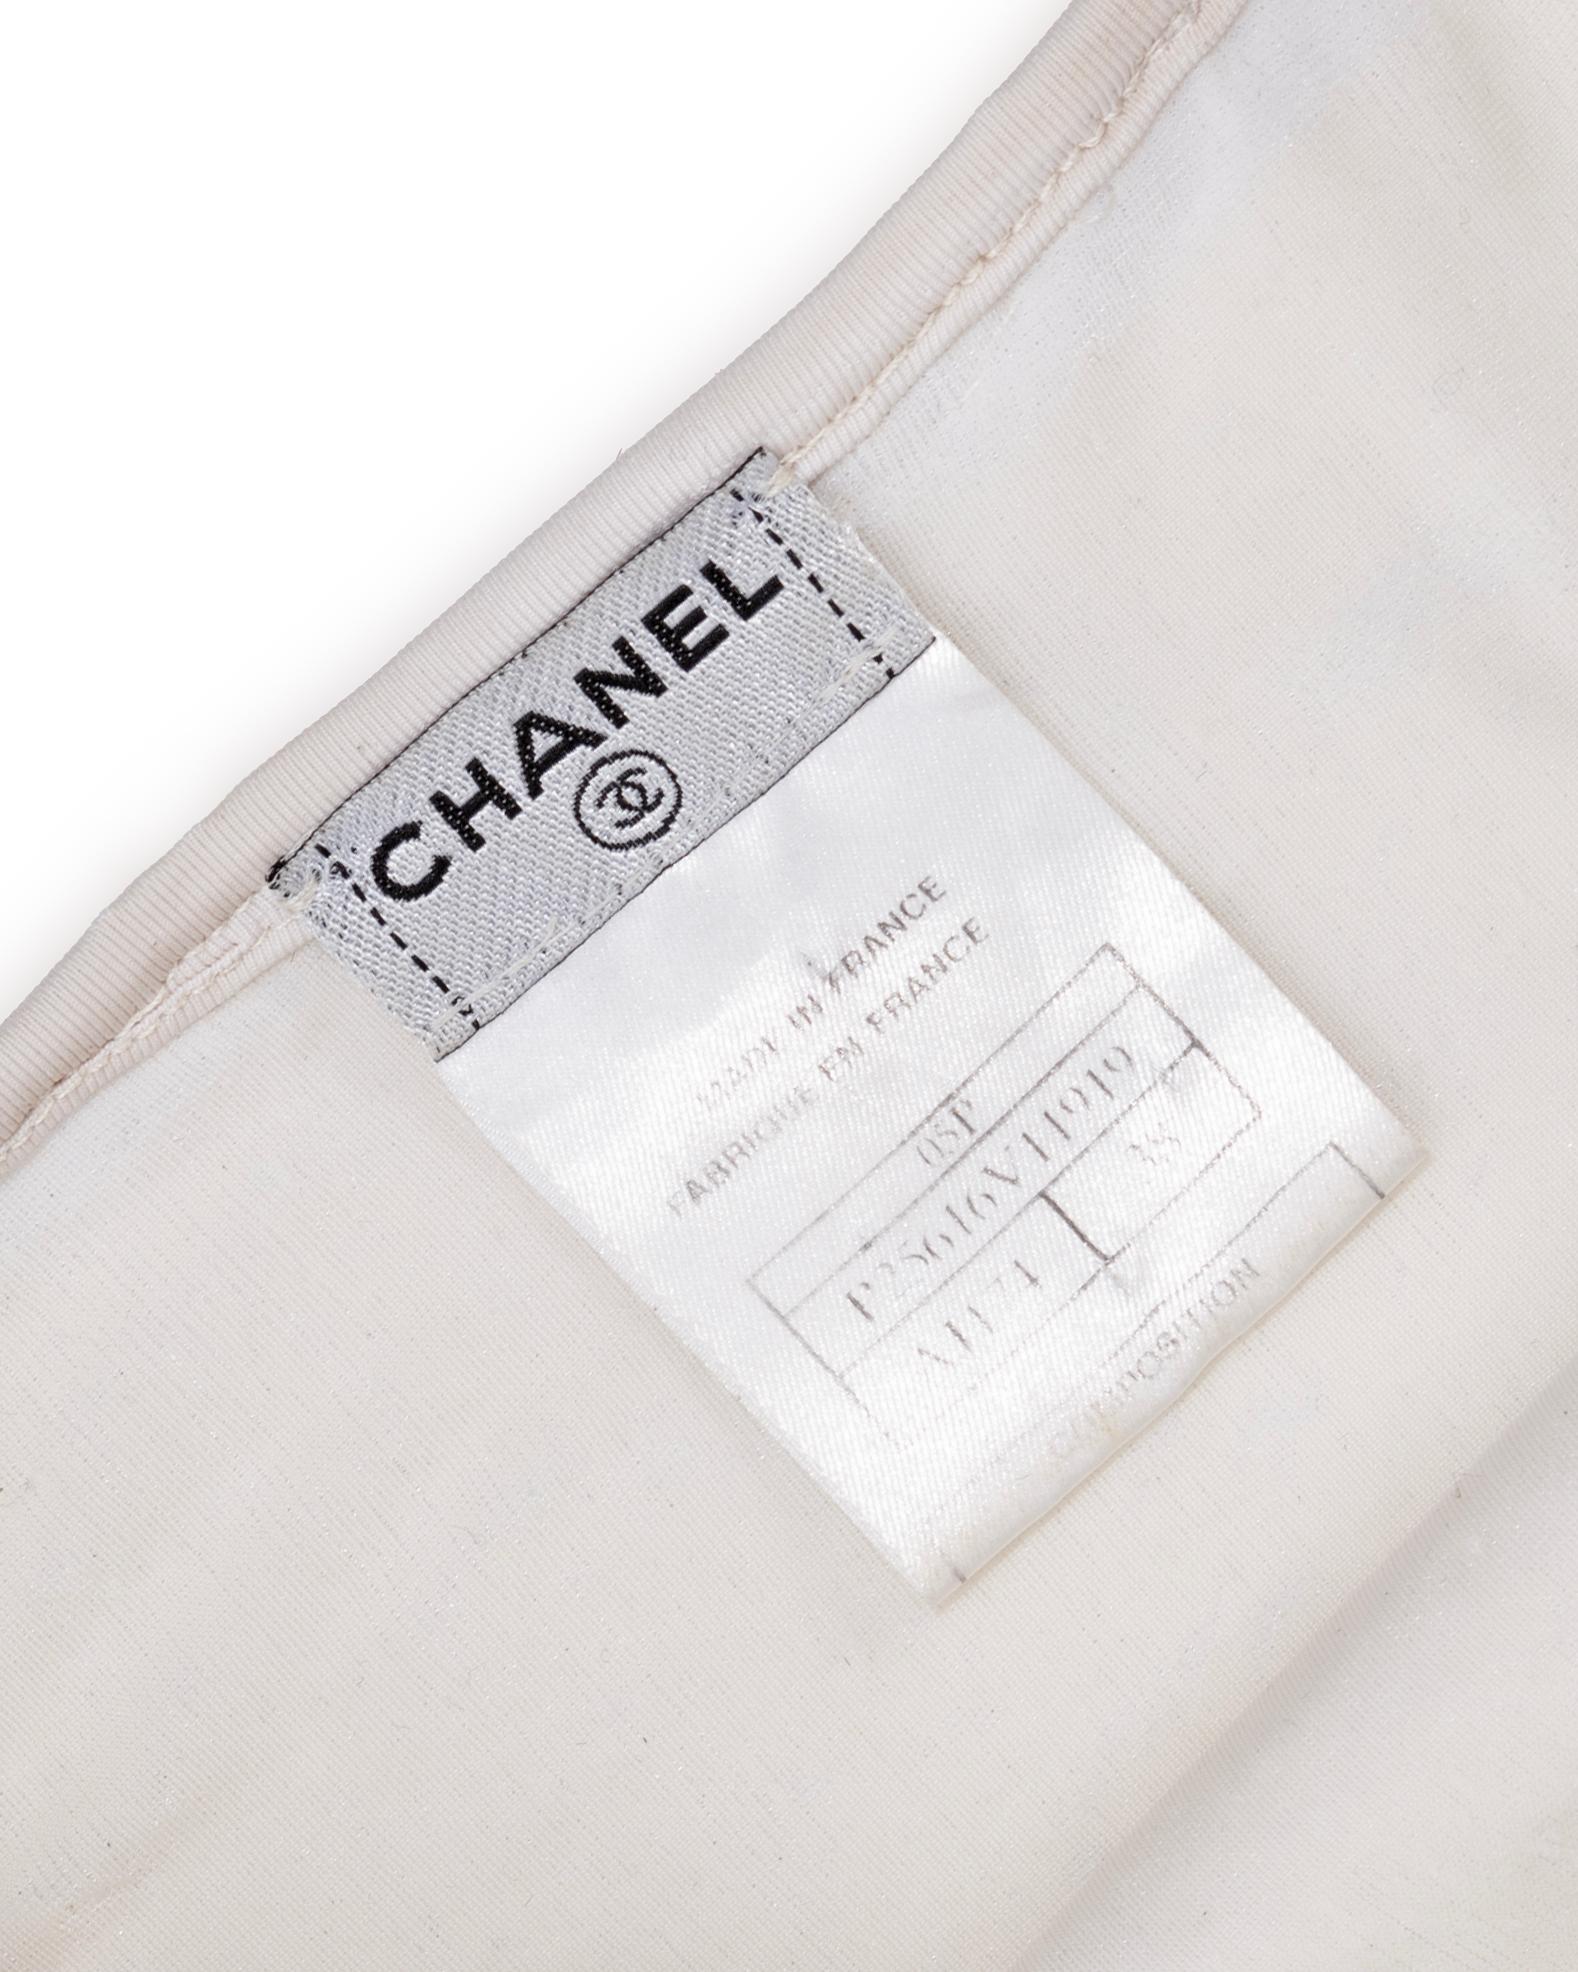 Chanel by Karl Lagerfeld White Iridescent Sequin Mini Dress, ss 2005 6